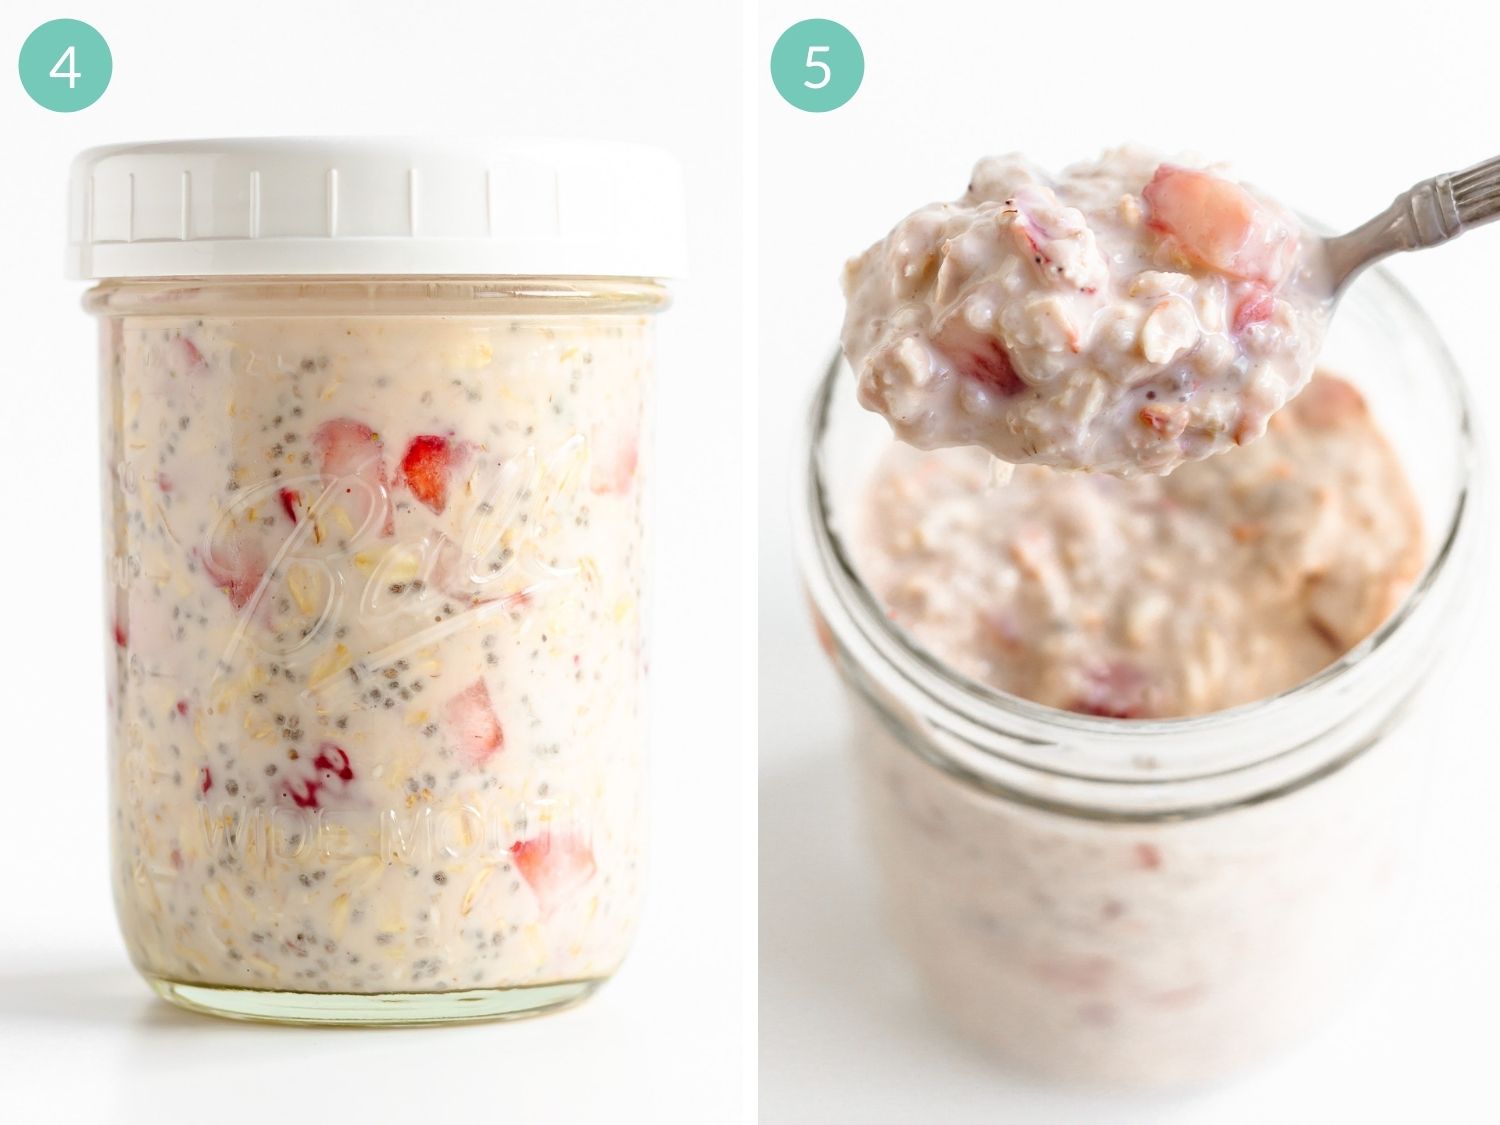 Collage showing strawberry overnight oats mixture sealed in a jar and a spoonful lifting out once finished soaking.